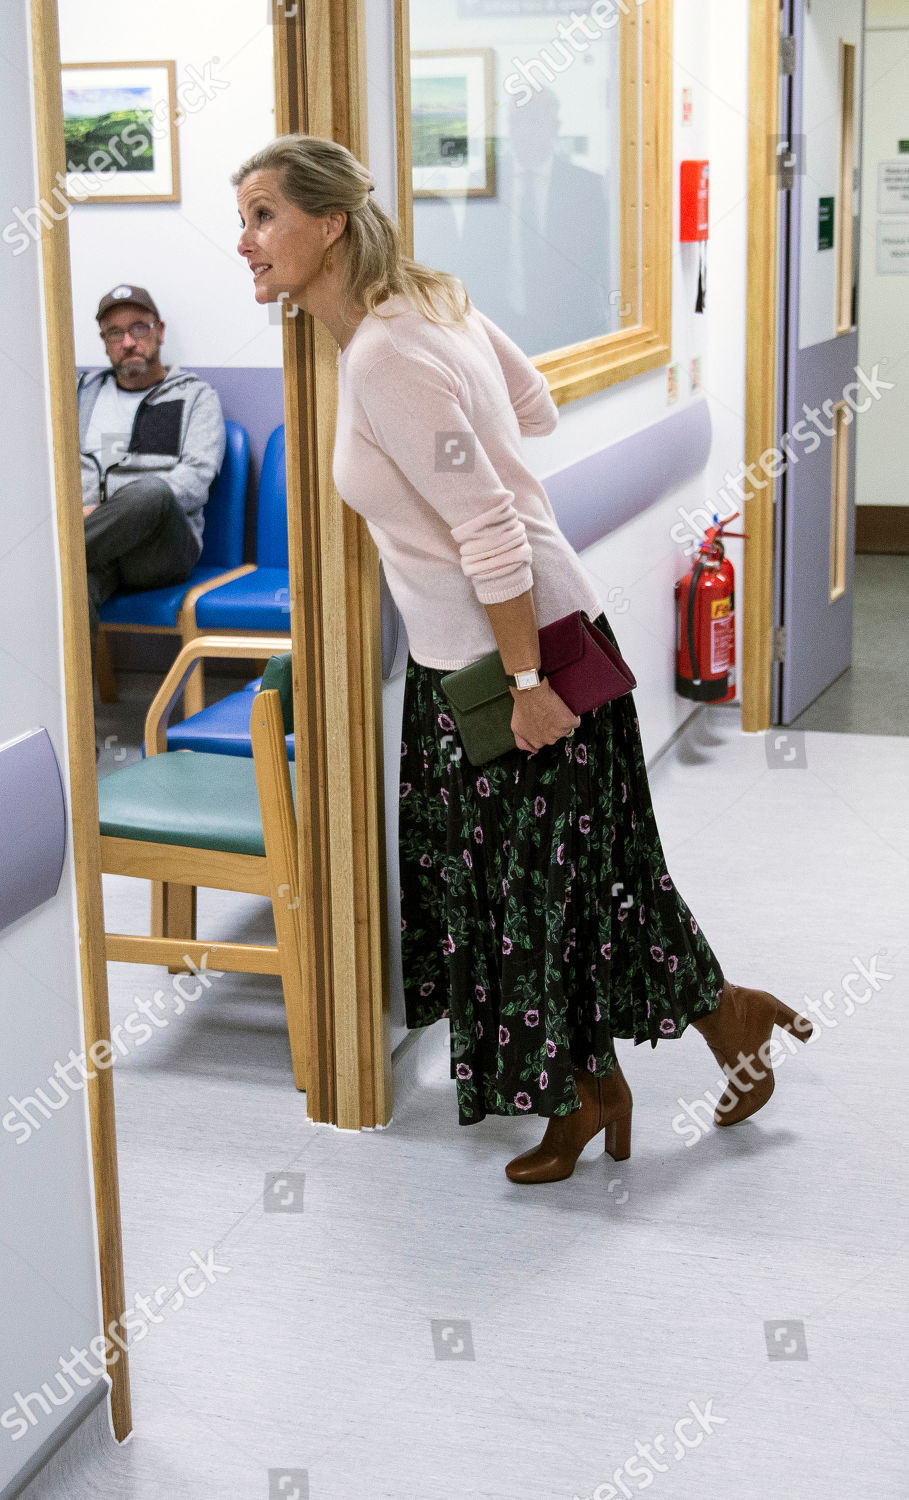 sophie-countess-of-wessex-visit-to-musgrove-park-hospital-taunton-somerset-uk-shutterstock-editorial-10422506al.jpg